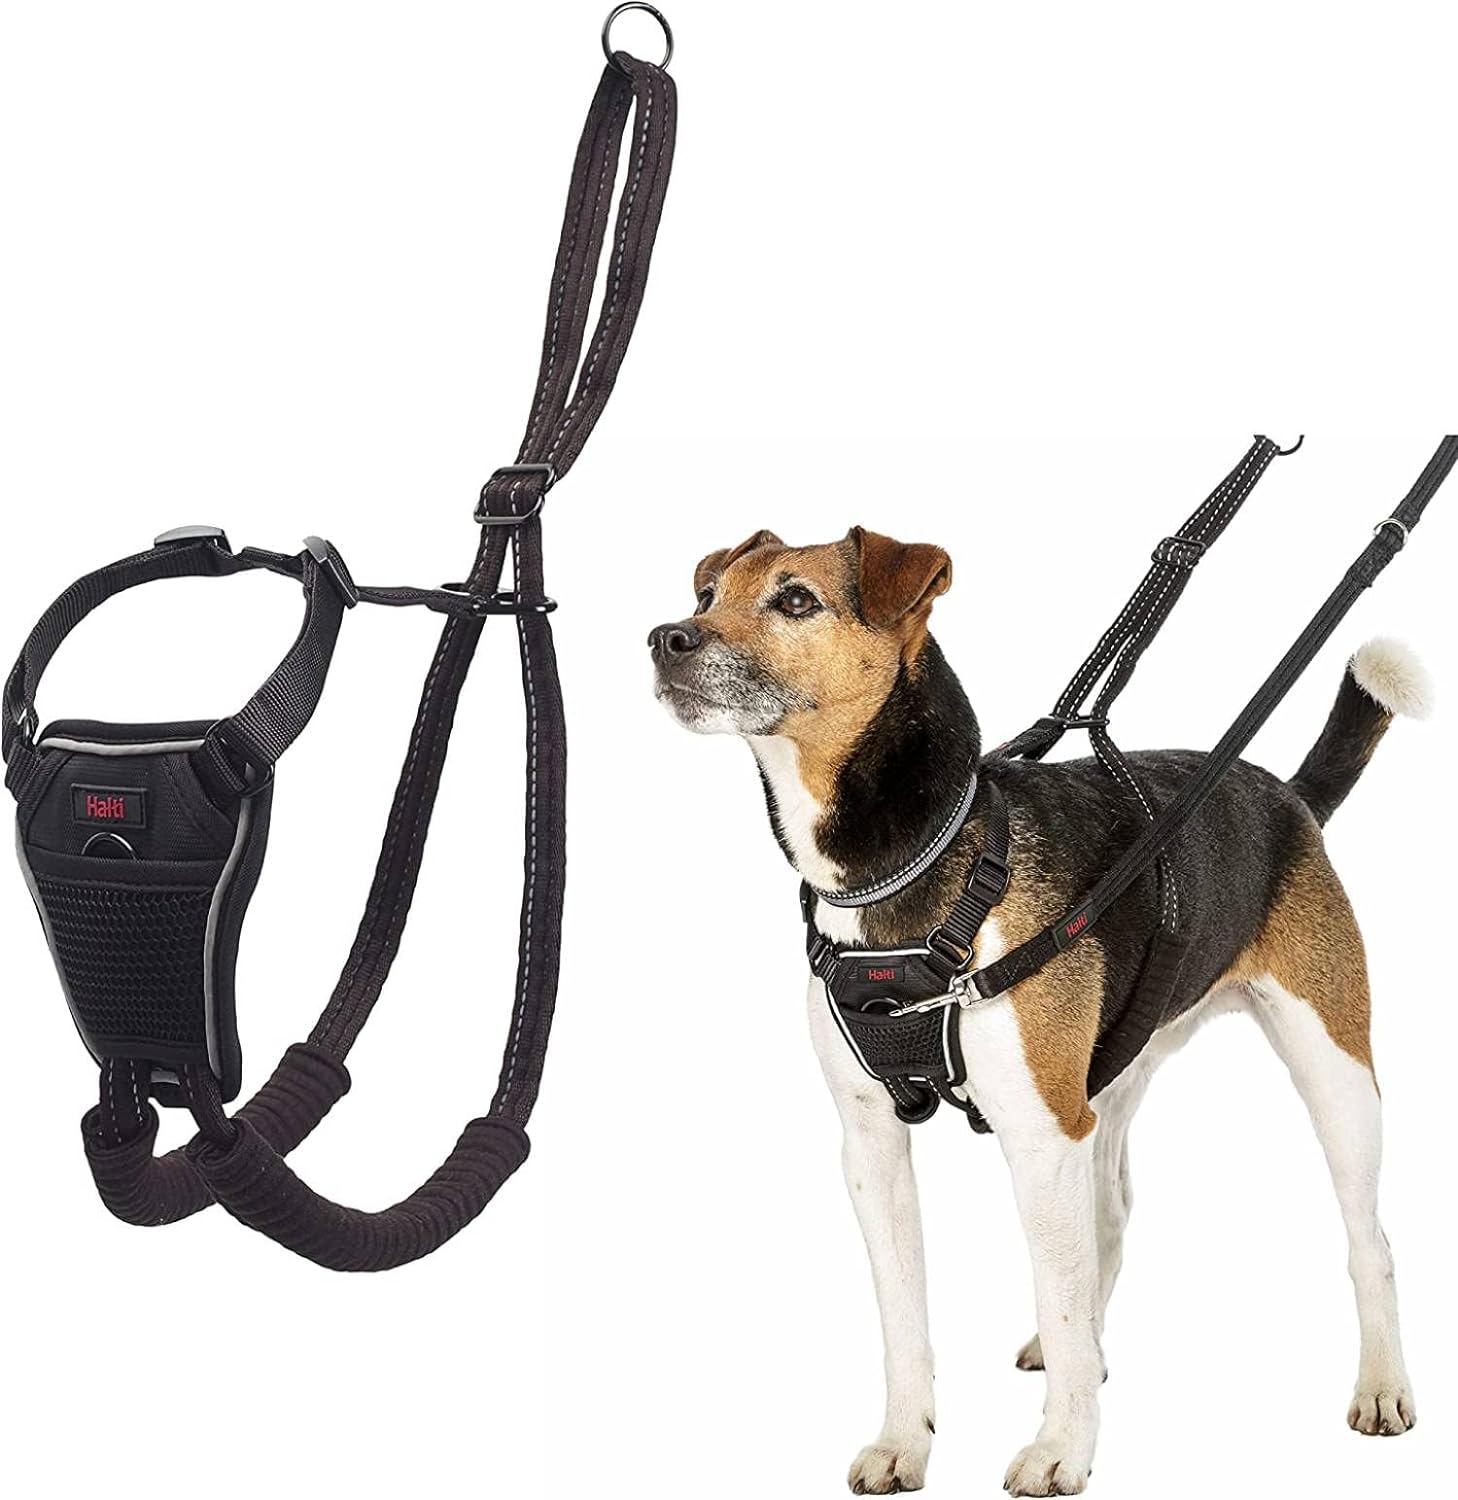 HALTI No Pull Harness - To Stop Your Dog Pulling on the Leash. Adjustable, Lightweight and Easy to Use. Reflective Dog Training Harness for Medium Dogs (Size M)